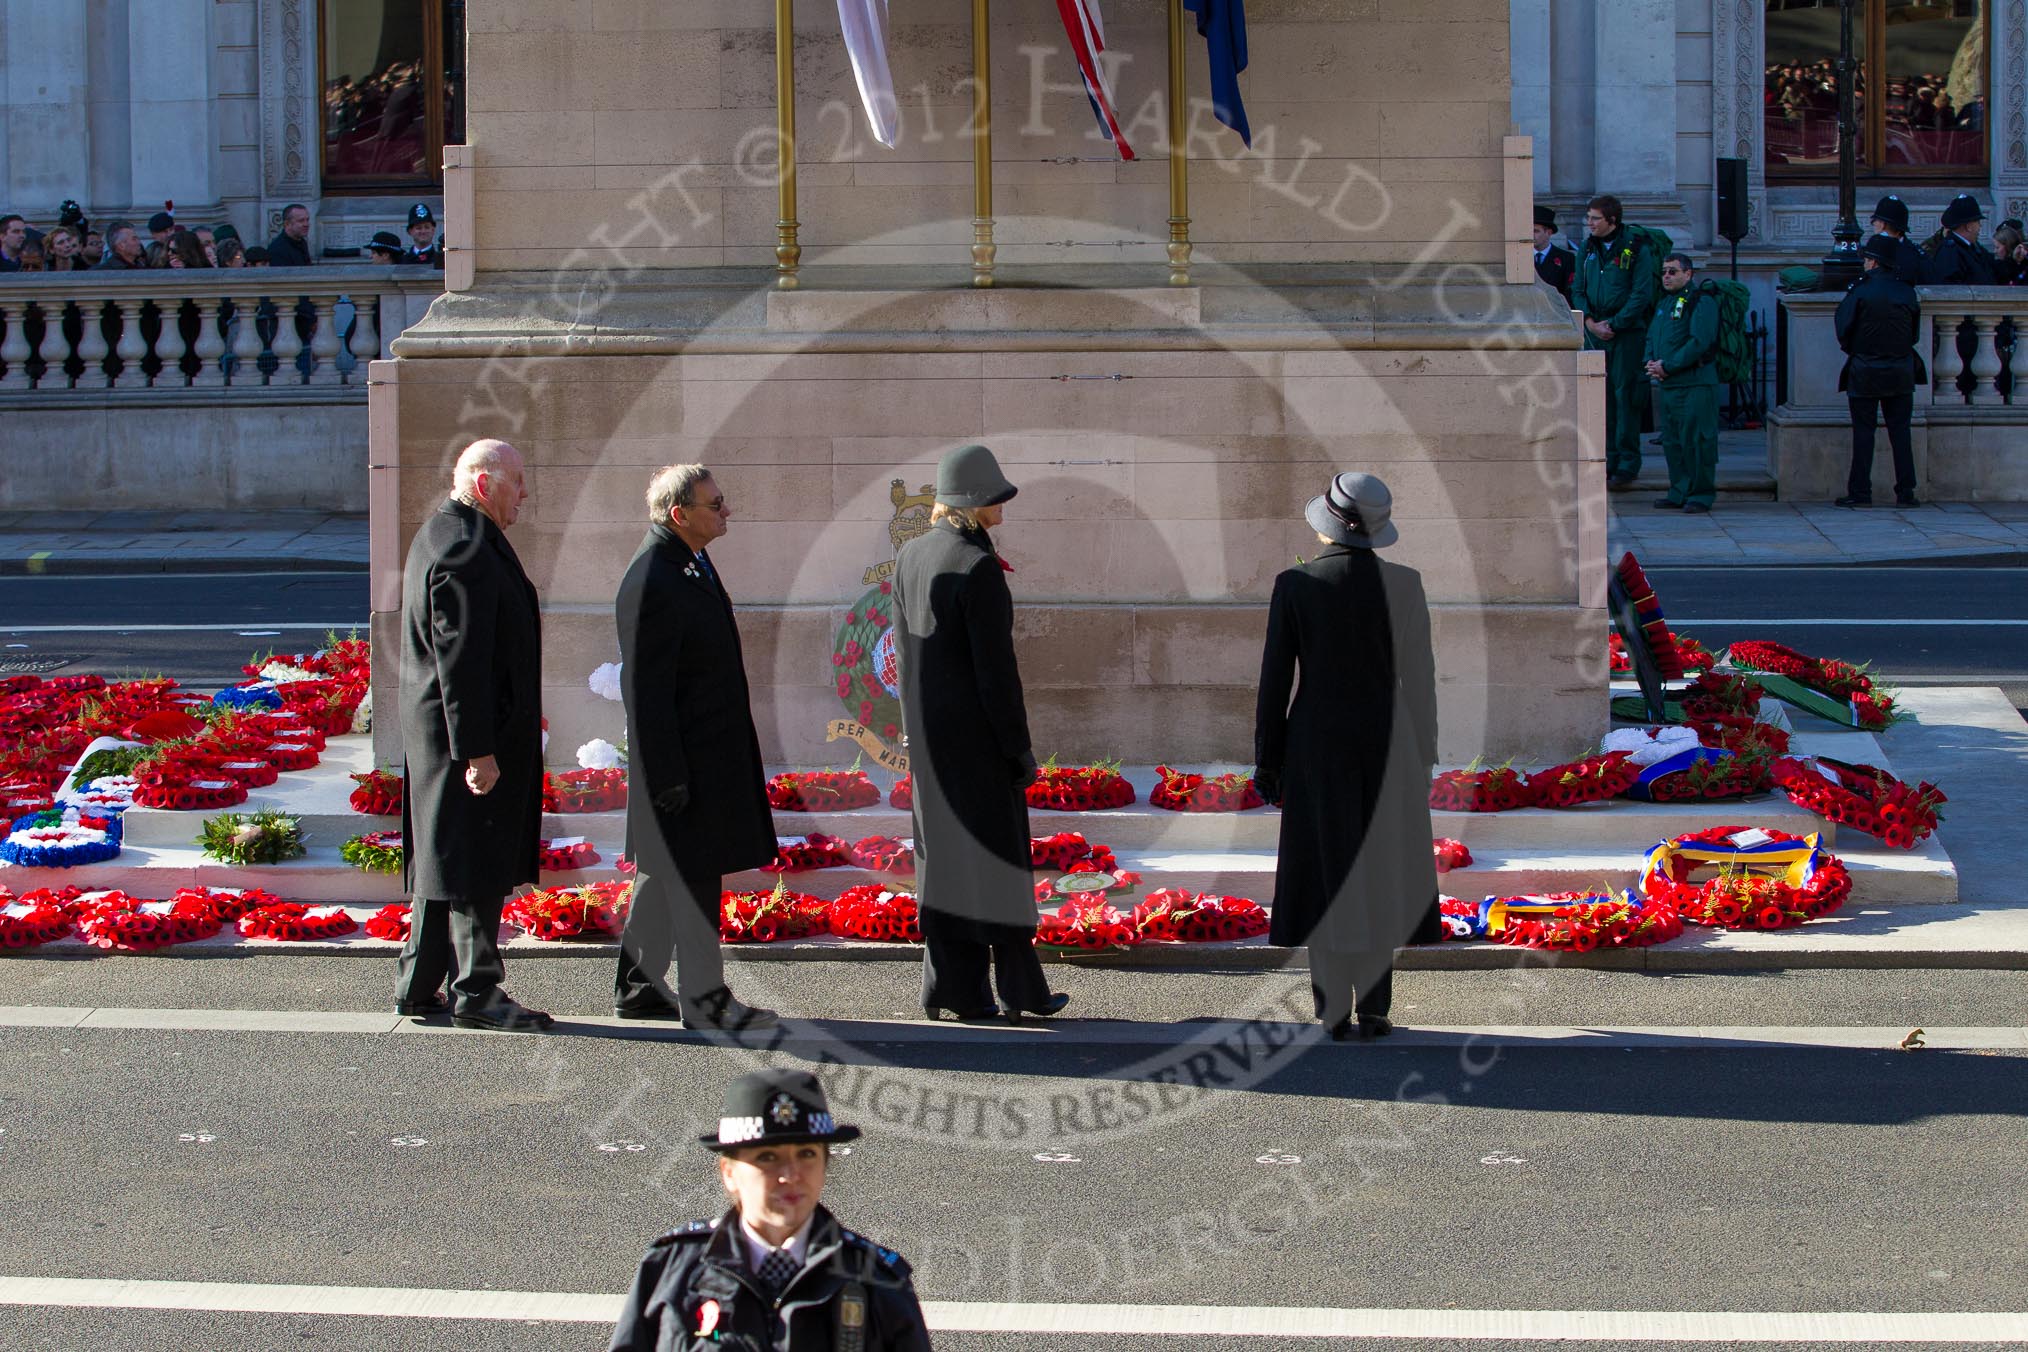 Remembrance Sunday 2012 Cenotaph March Past: The last four wreaths have been laid..
Whitehall, Cenotaph,
London SW1,

United Kingdom,
on 11 November 2012 at 12:34, image #1799